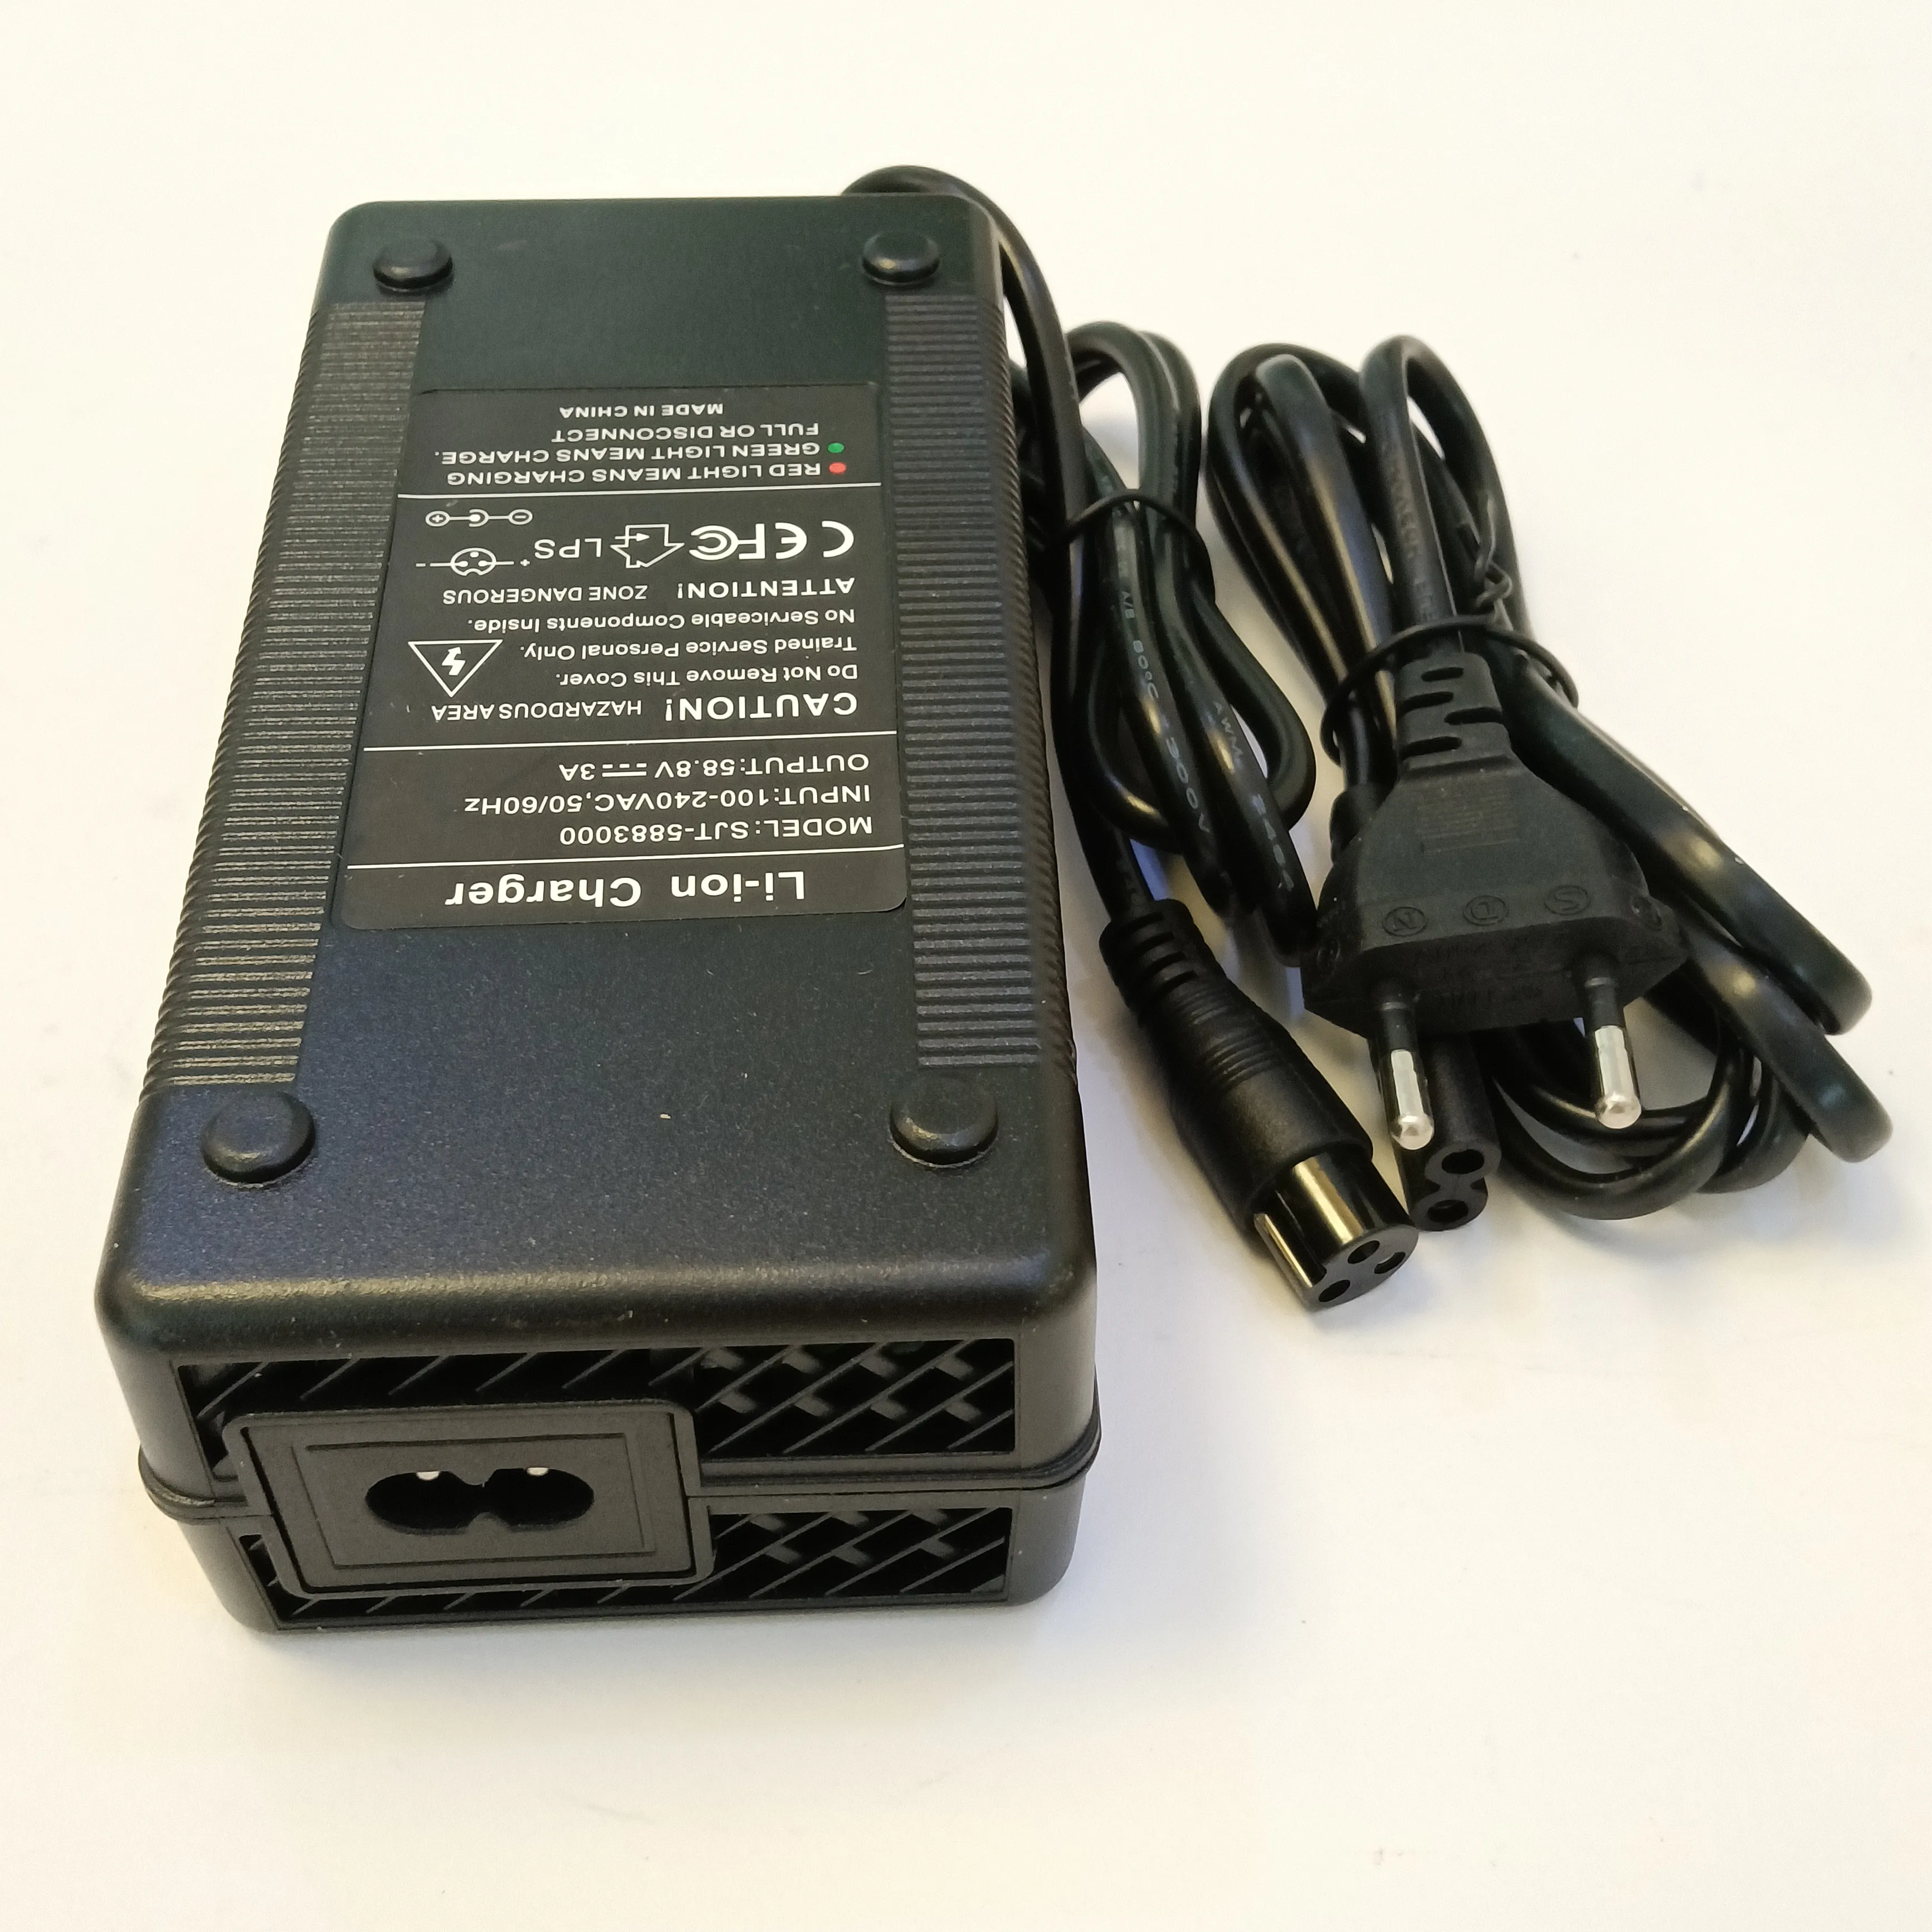 58.8v 3a 176.4w 18650 battery charger ac 100-240v to dc 58.8v 3a chargers batteries power supply for electric scooter